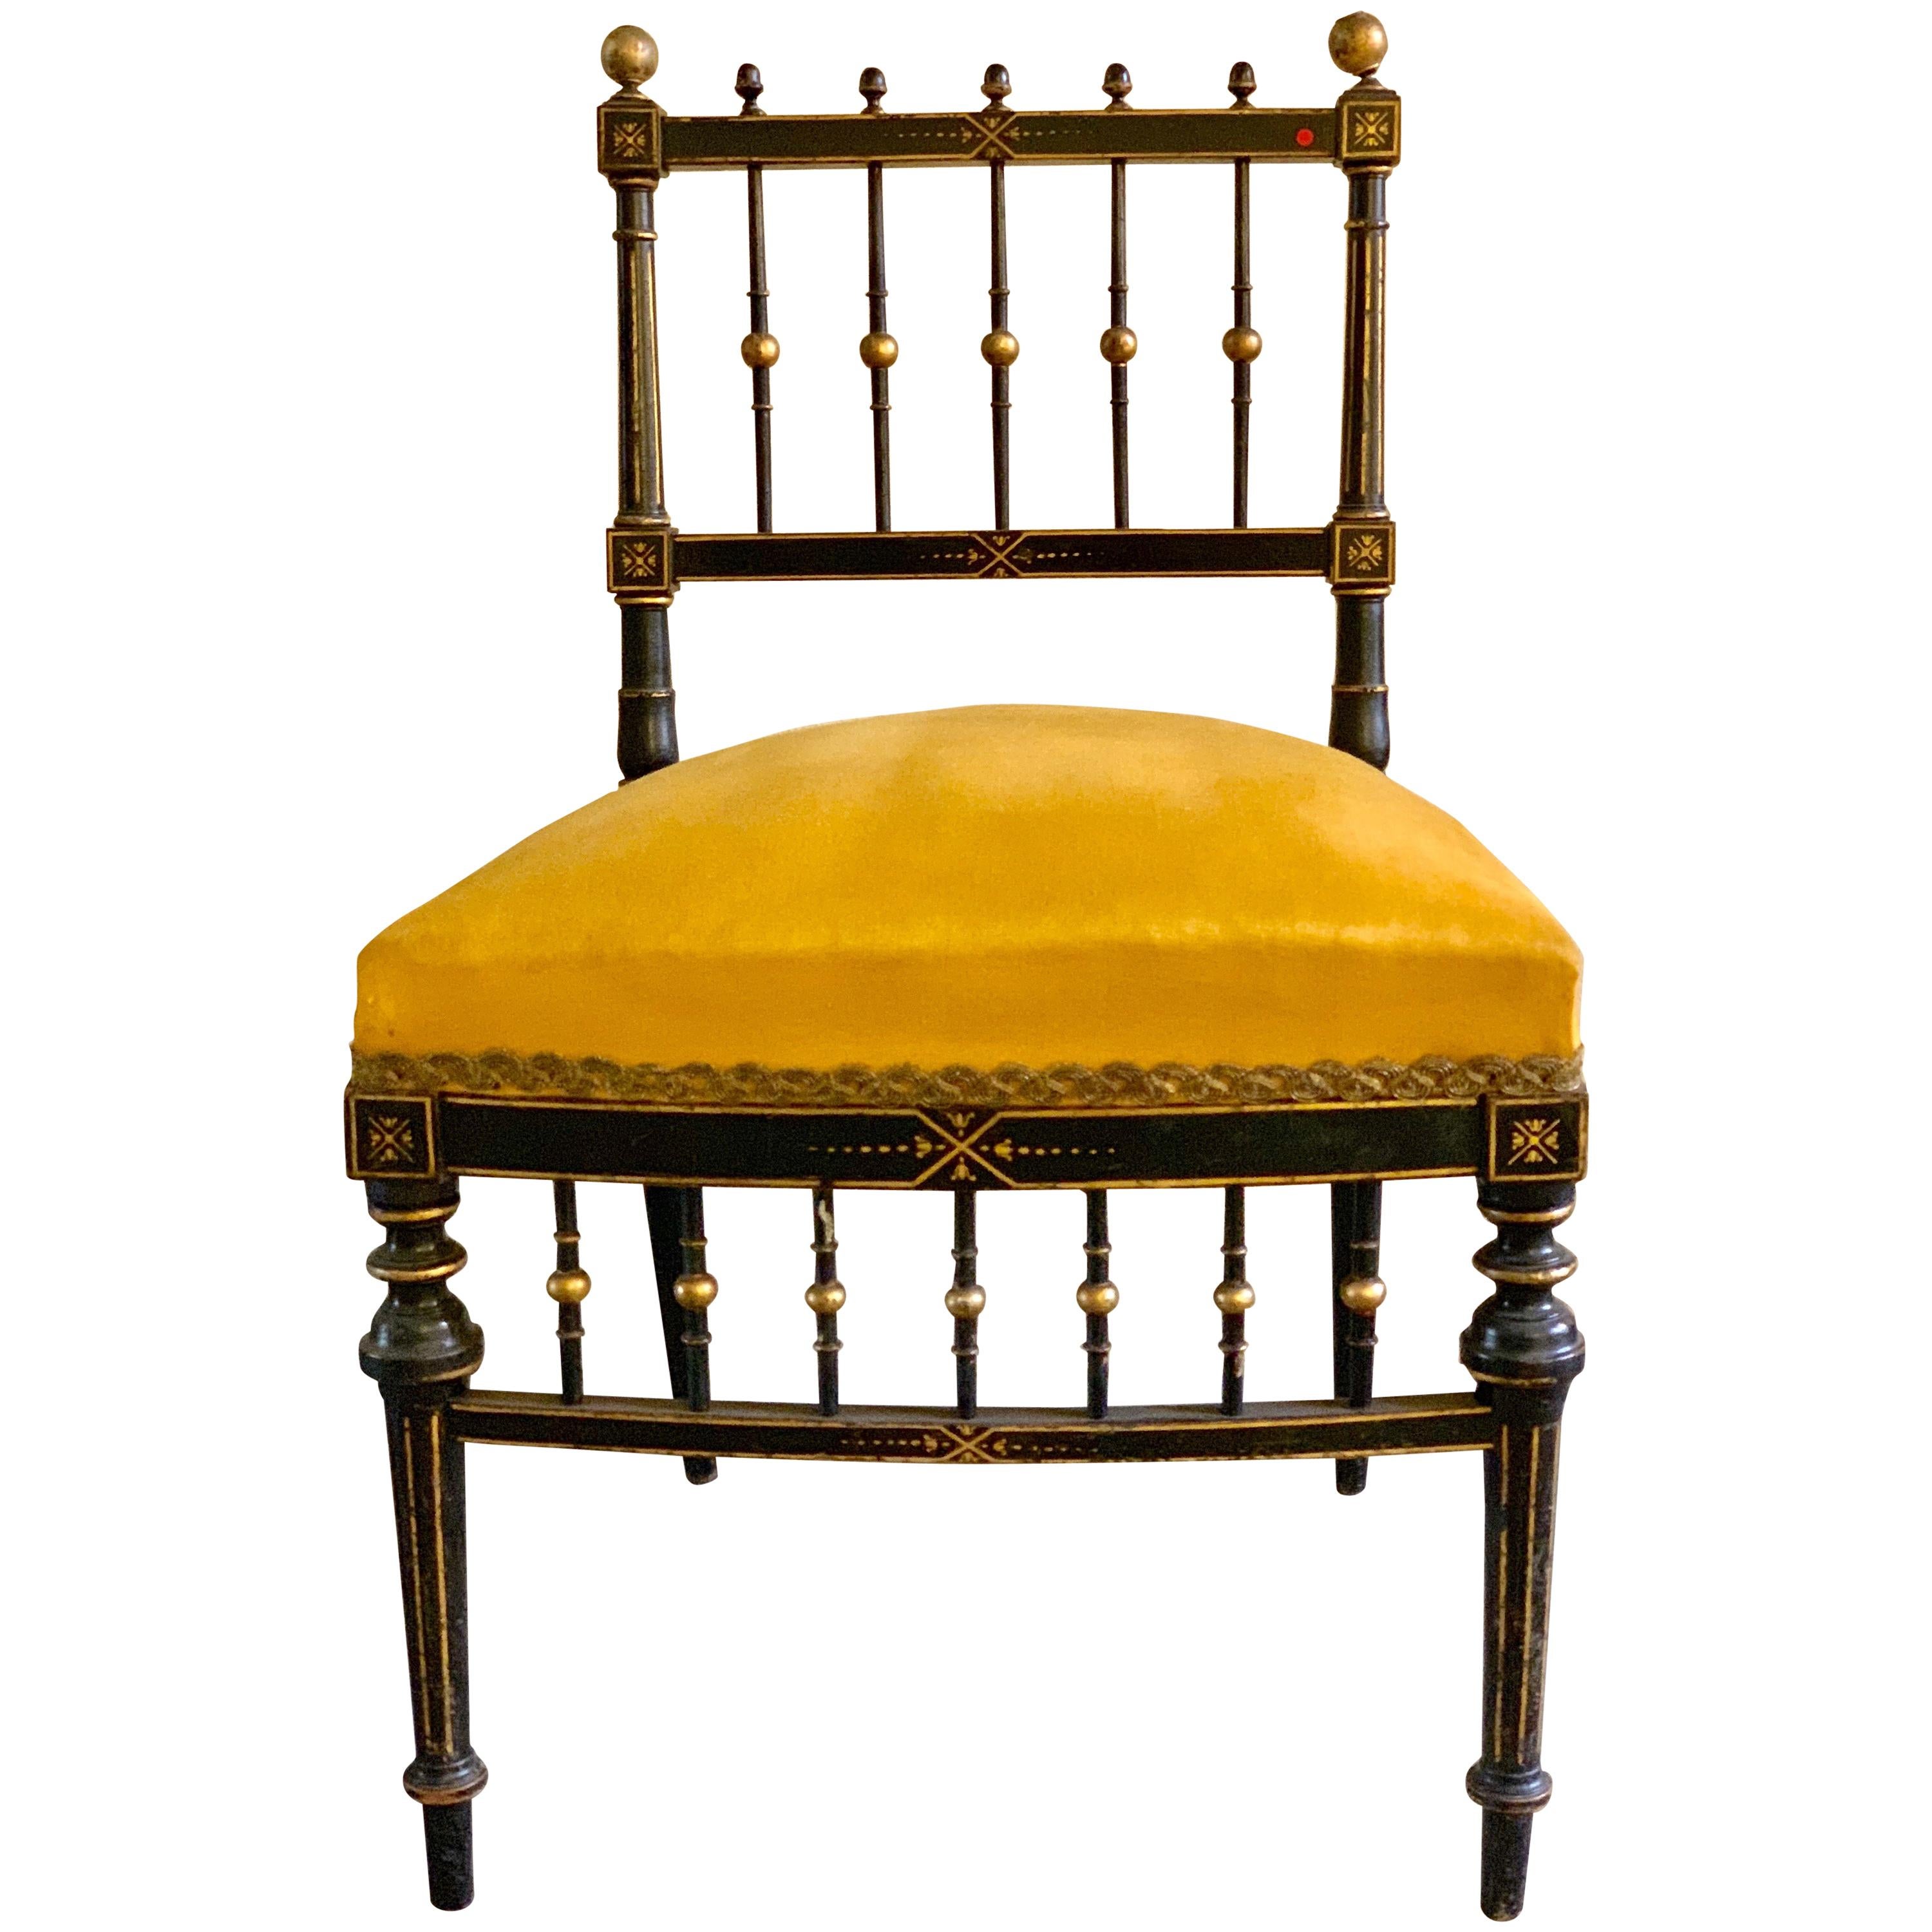 Early 20th Century French Chair with Gilt Detailing